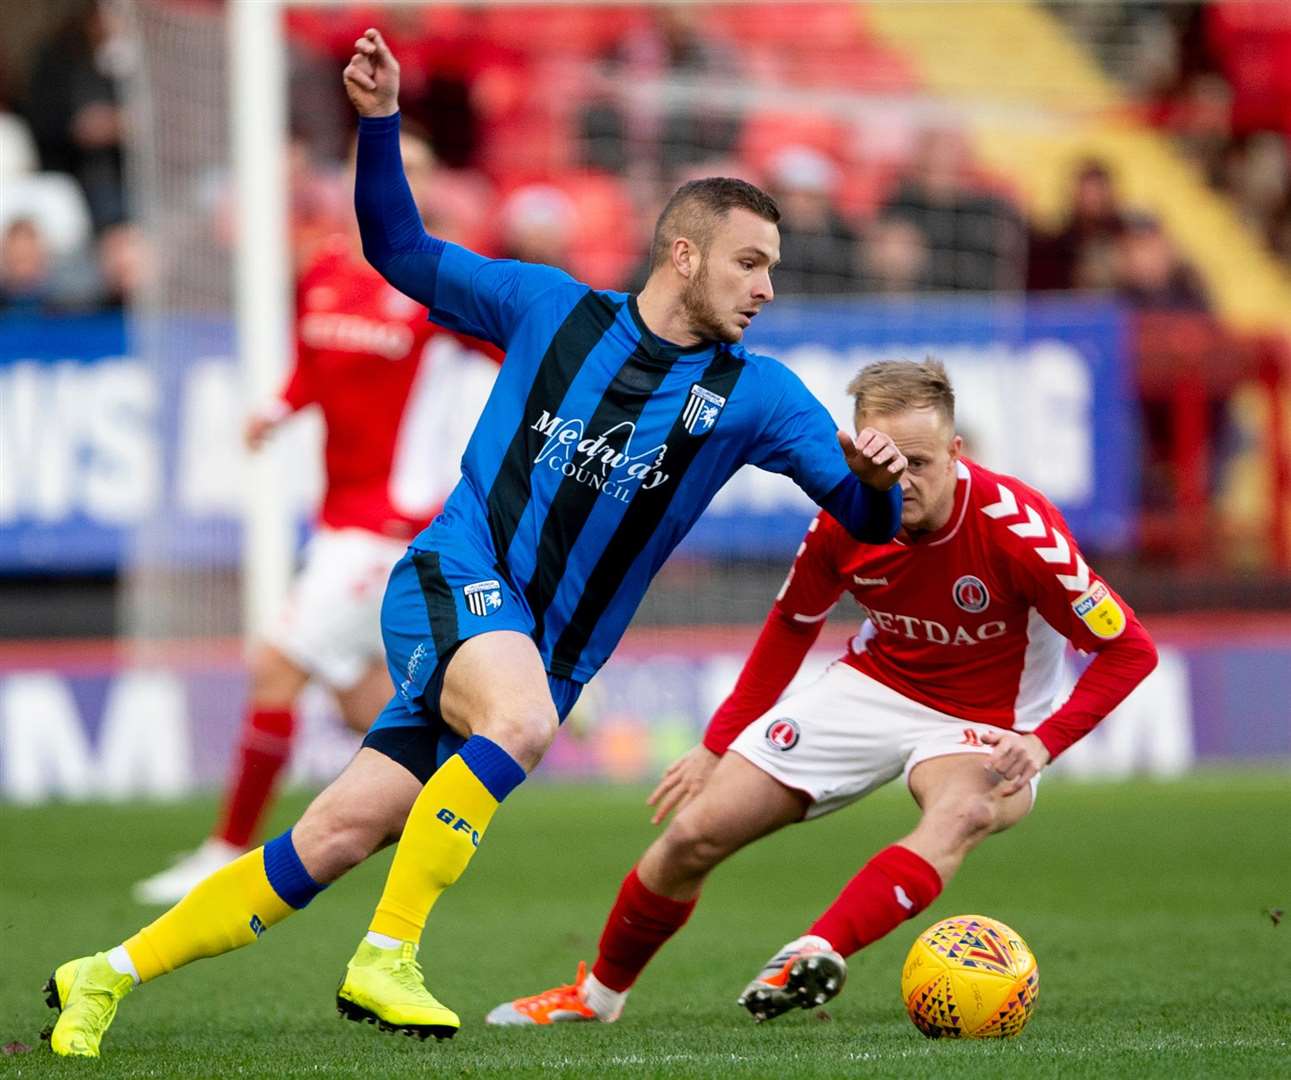 Dean Parrett cuts inside of Charlton's Ben Reeves Picture: Ady Kerry